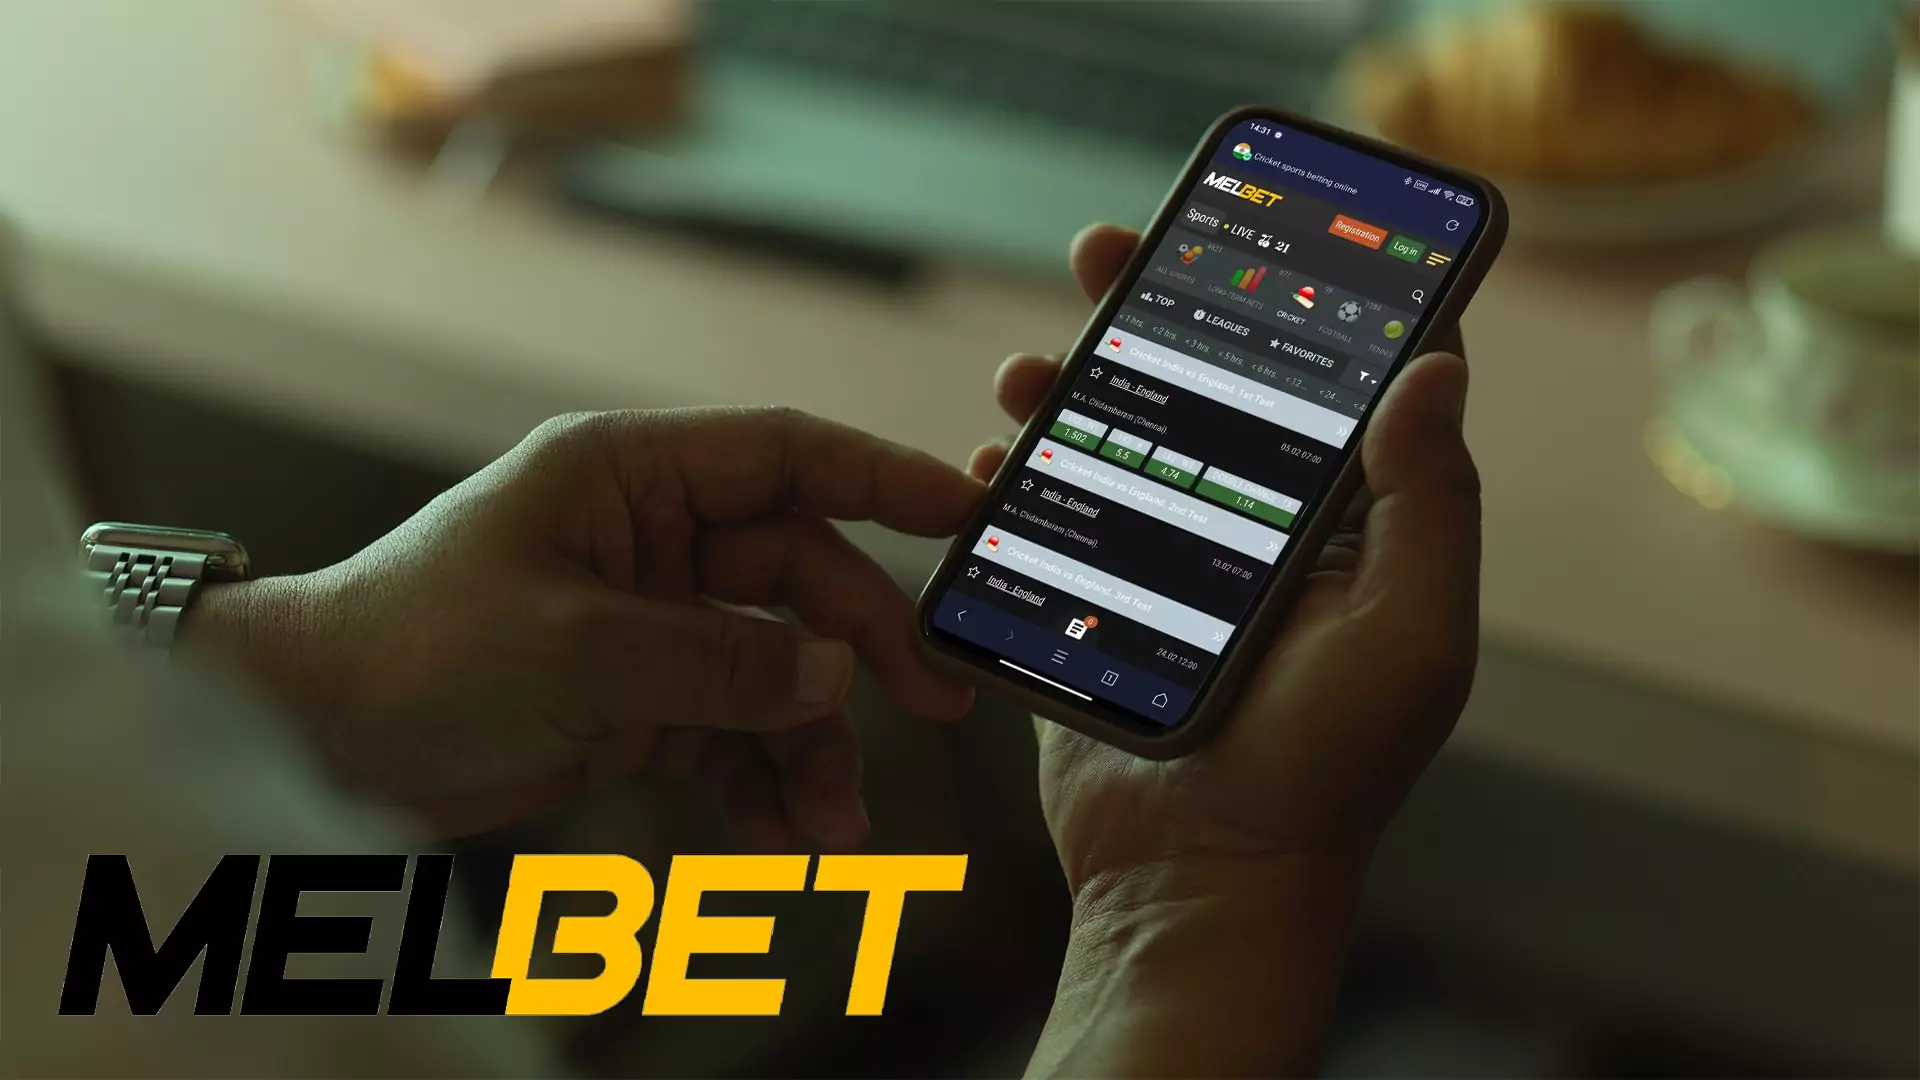 If you don't want to download separate Melbet application you can bet on sports from your smartphone via mobile version of the site.